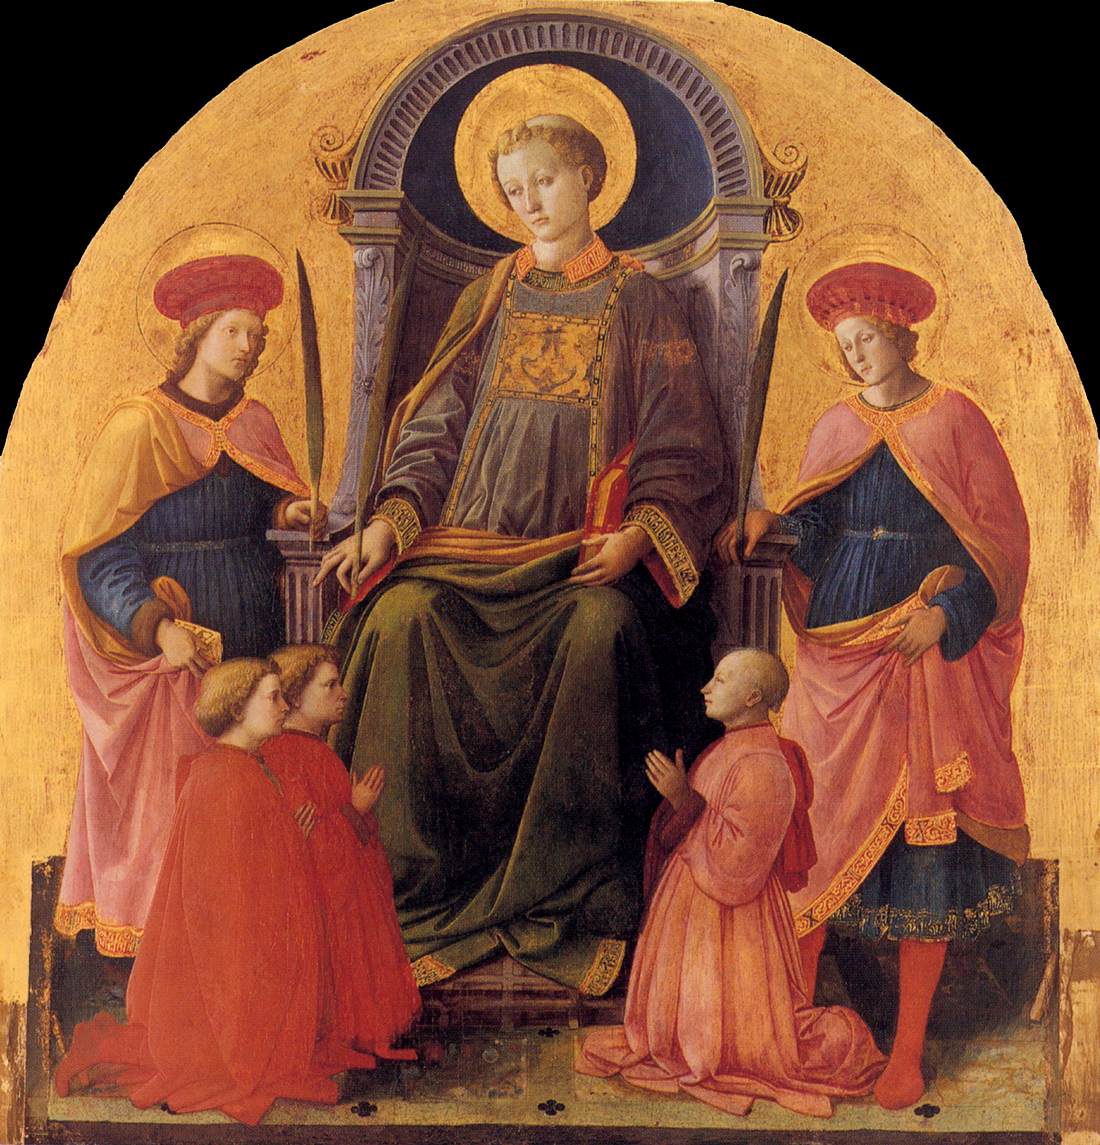 Saint Lawrence Enthroned with Saints and Donors